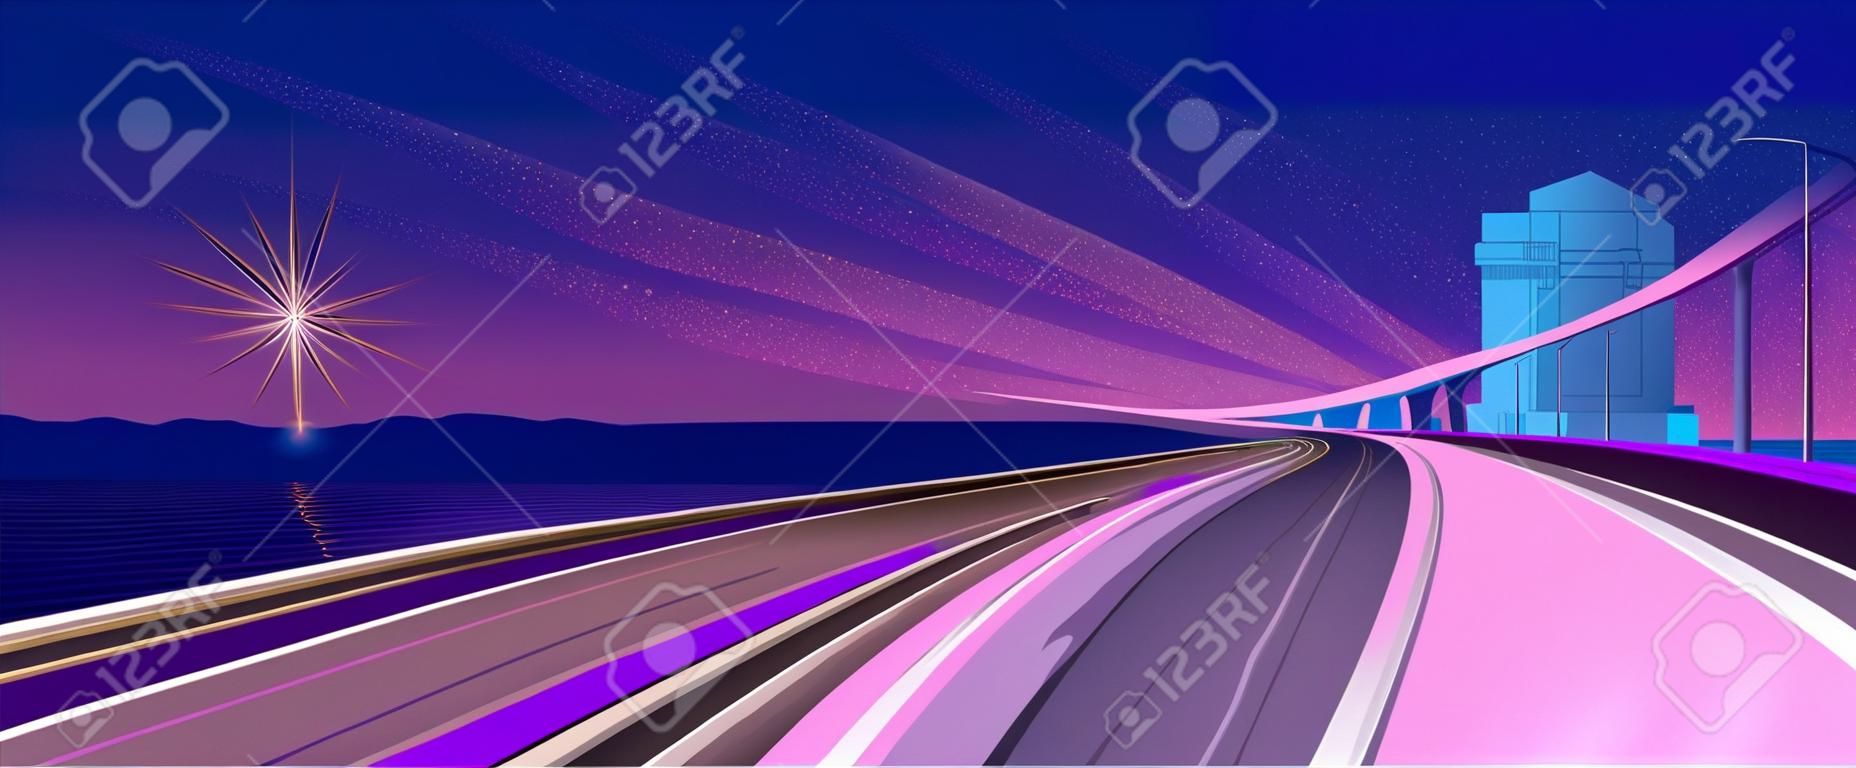 Vector conceptual background, traffic, panoramic view of the road stretching into the distance, bridge, futuristic abstract landscape